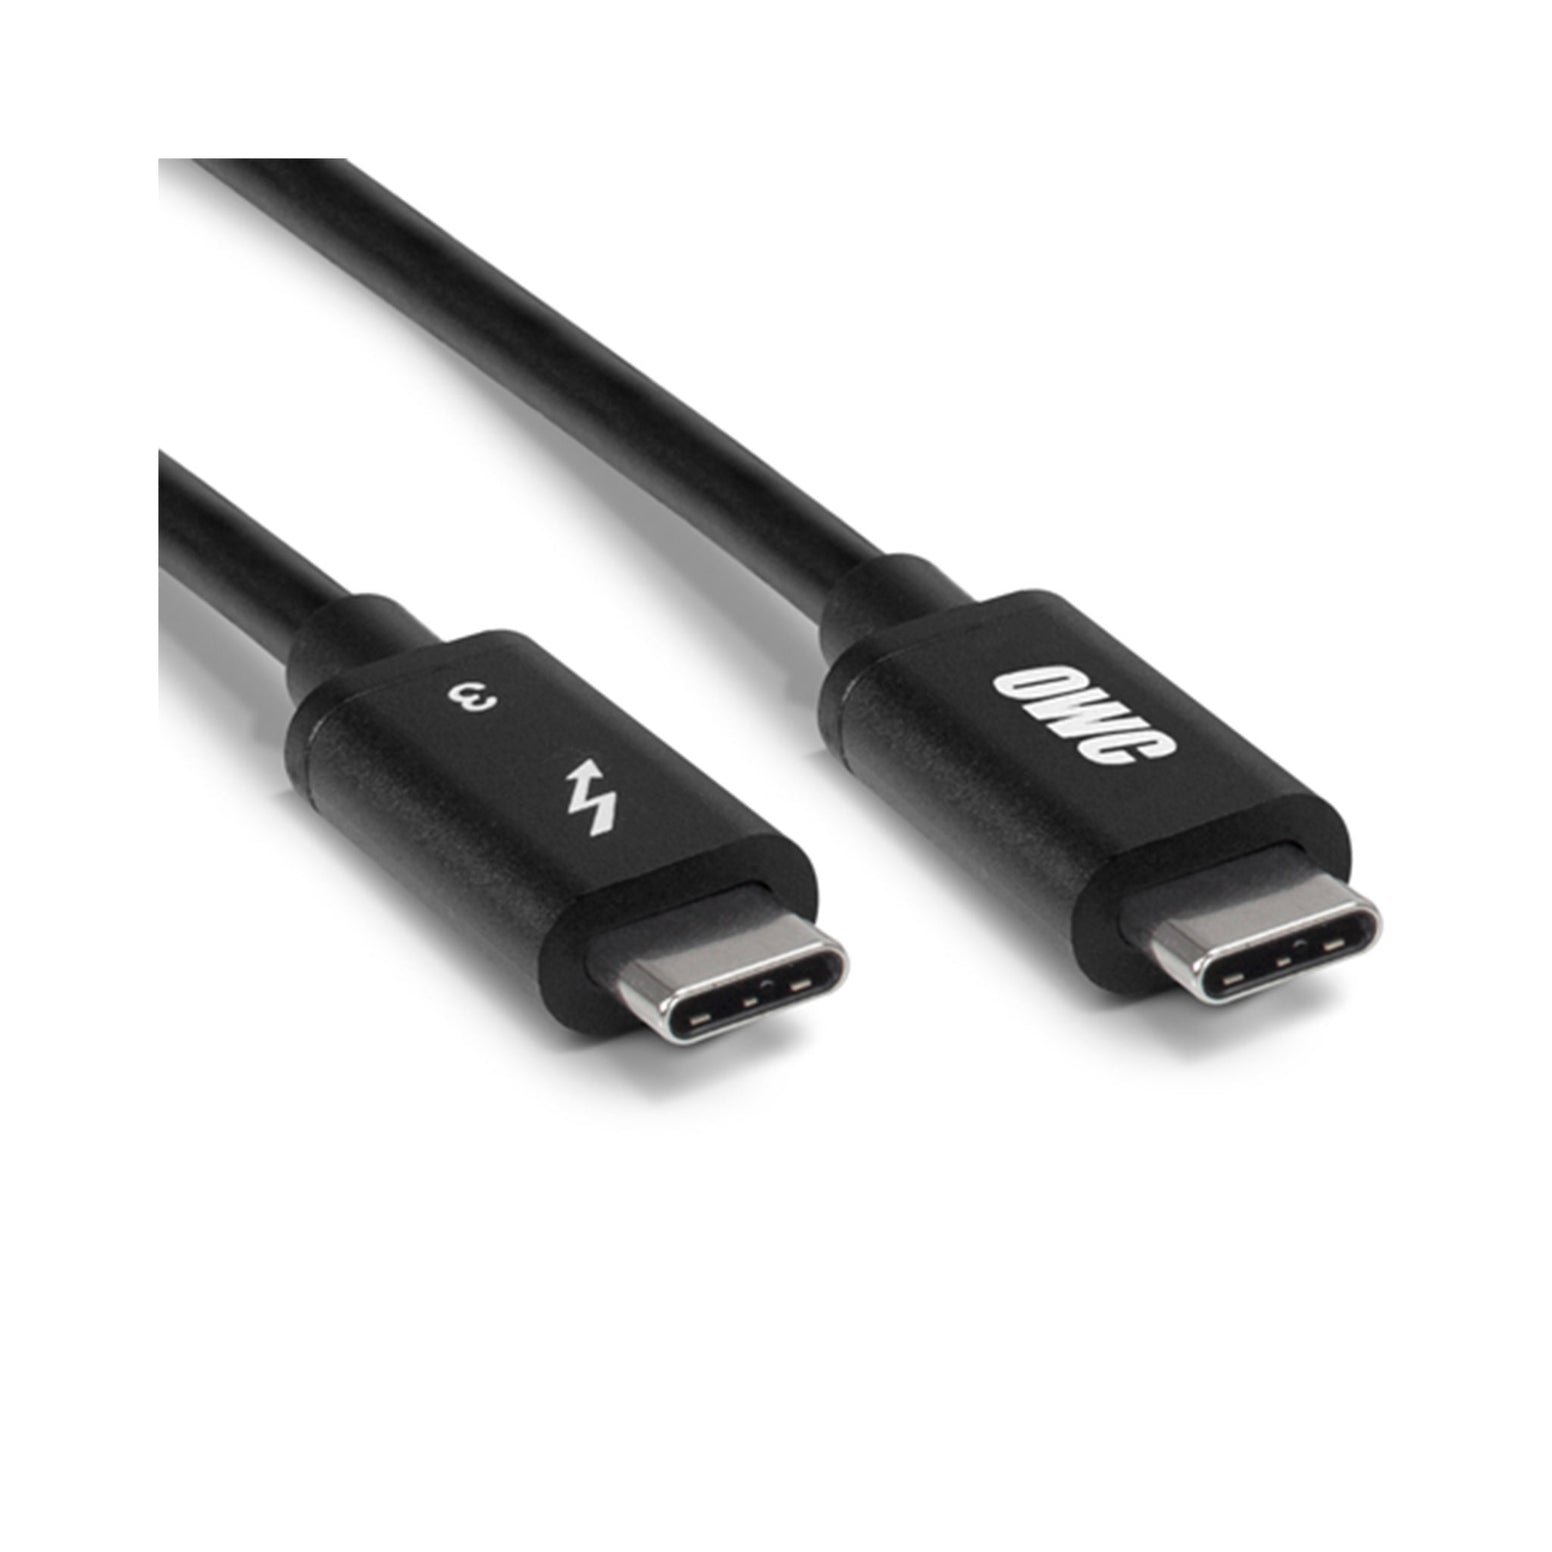 OWC Thunderbolt 3 (20Gb/s) USB-C Premium Connection Cable - 2.0m - Discontinued